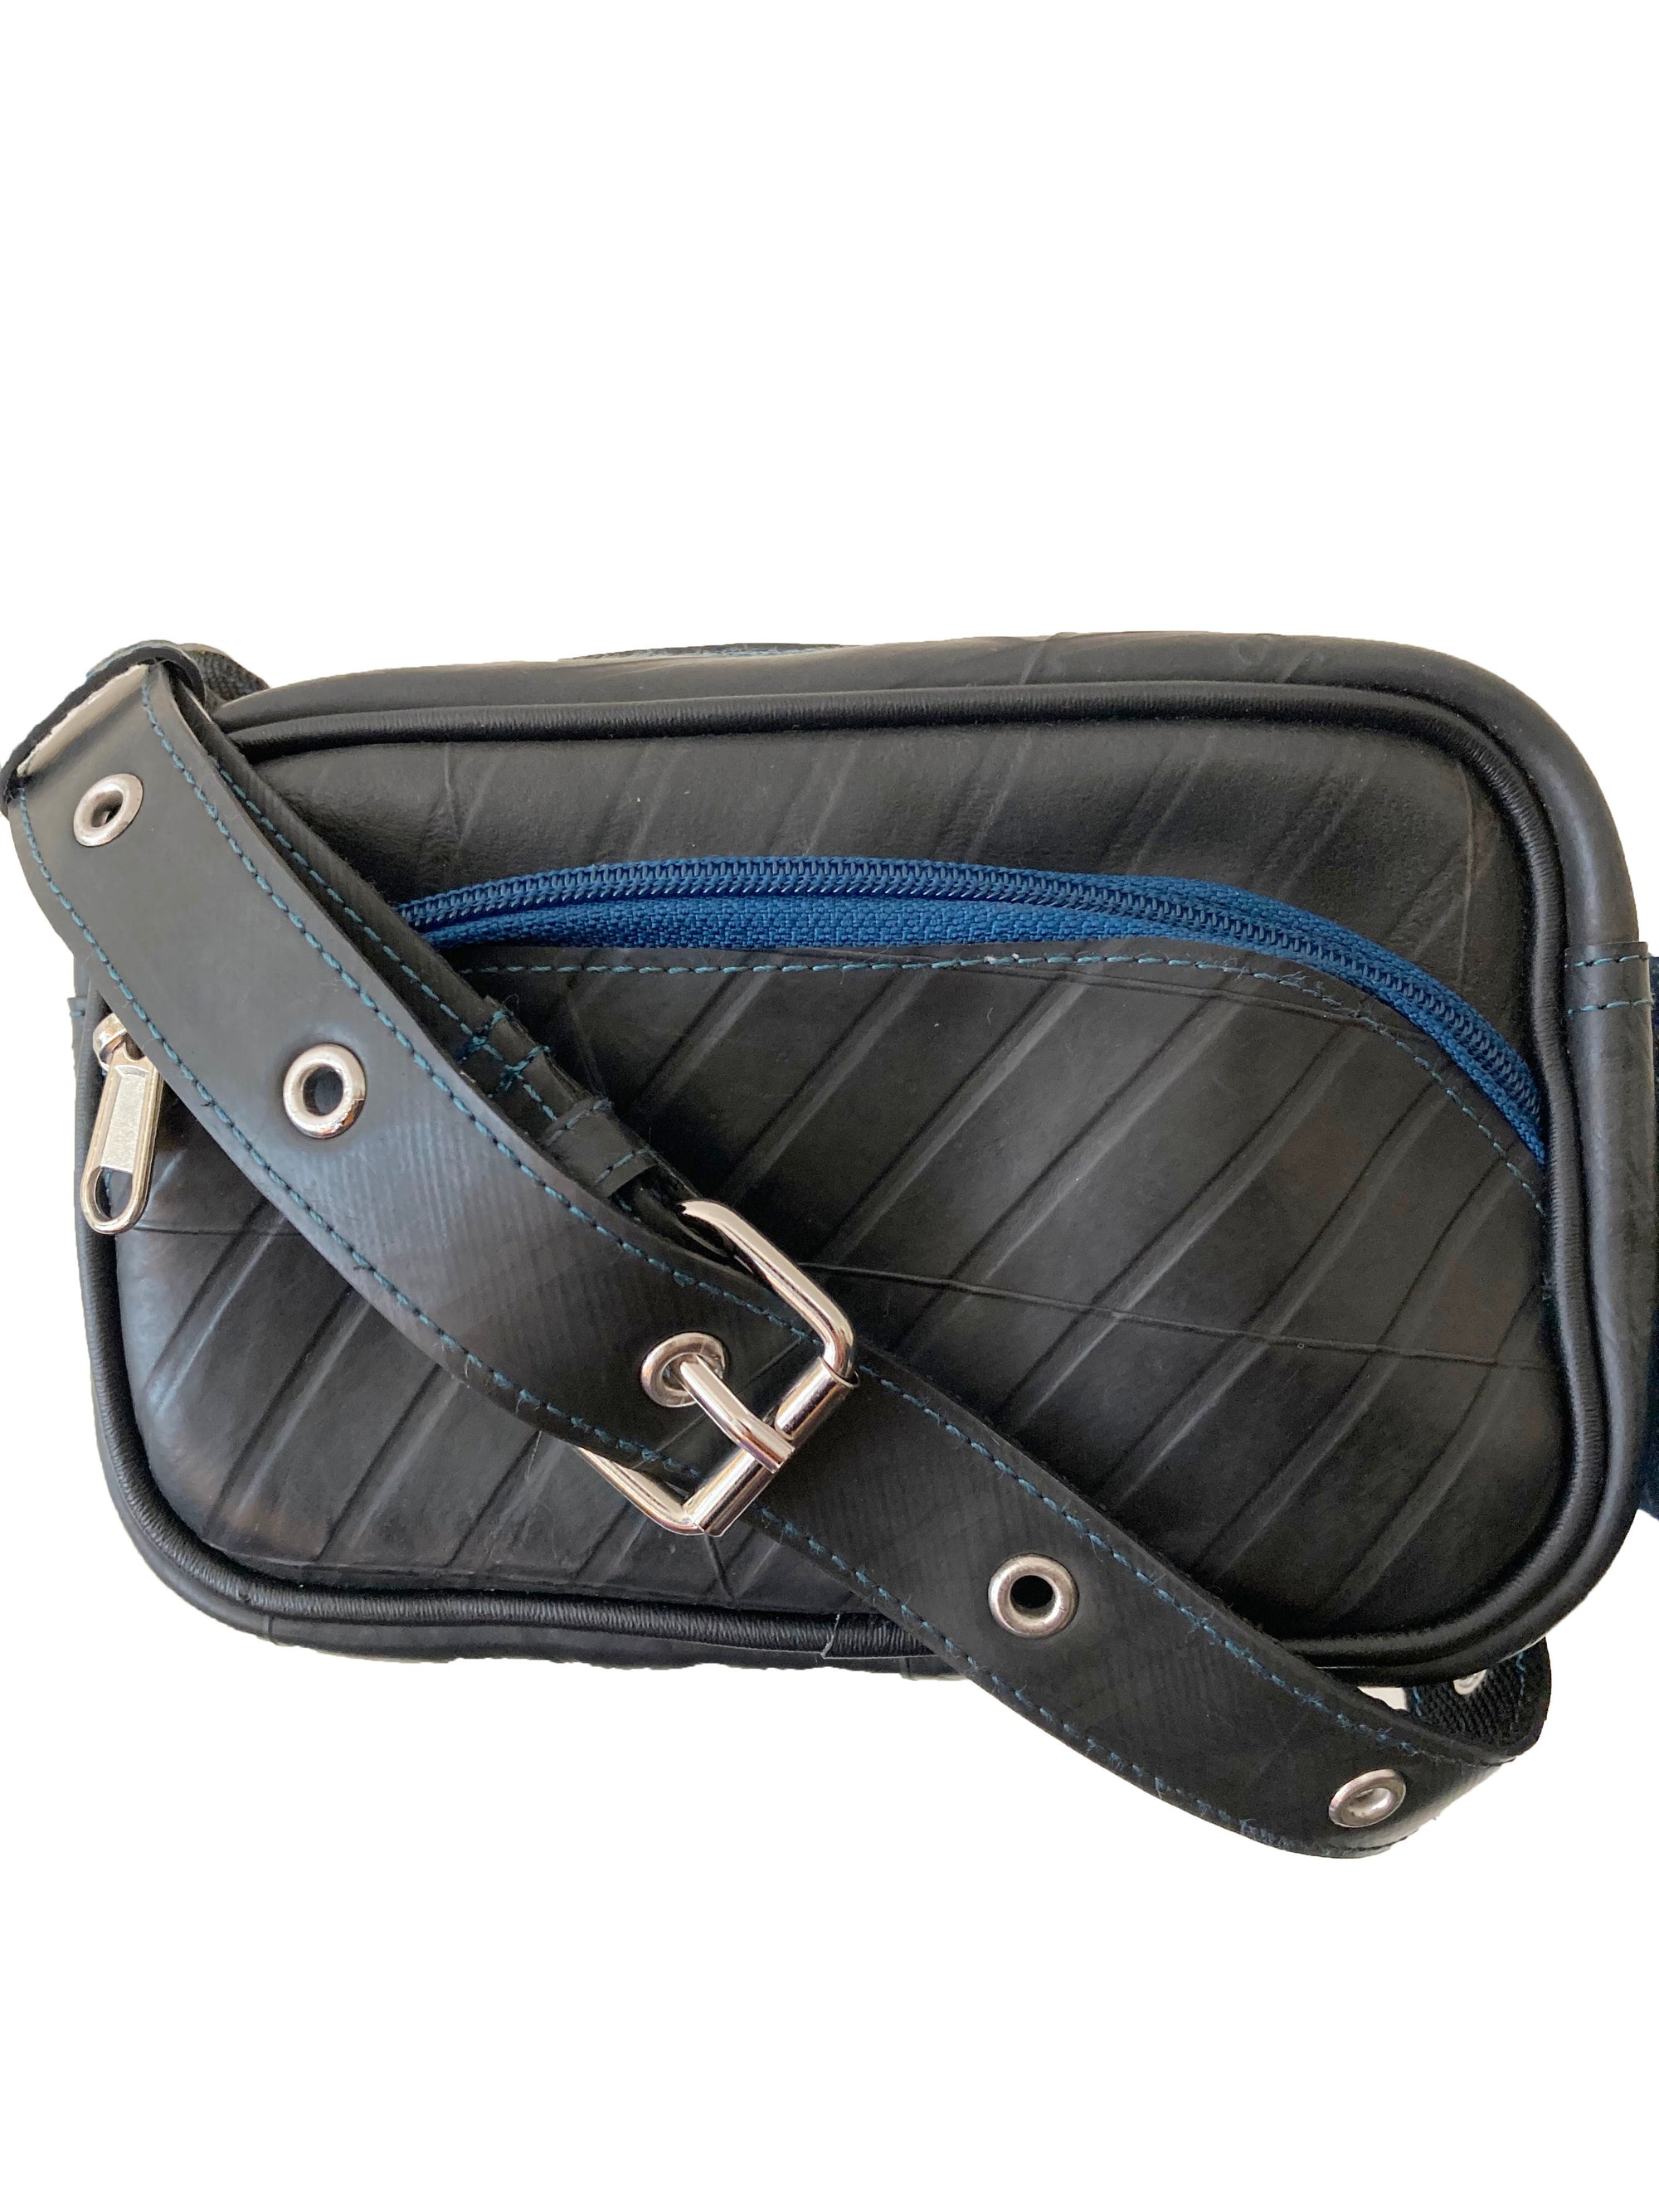 Unisex Bum Bag-Recycled Tyre